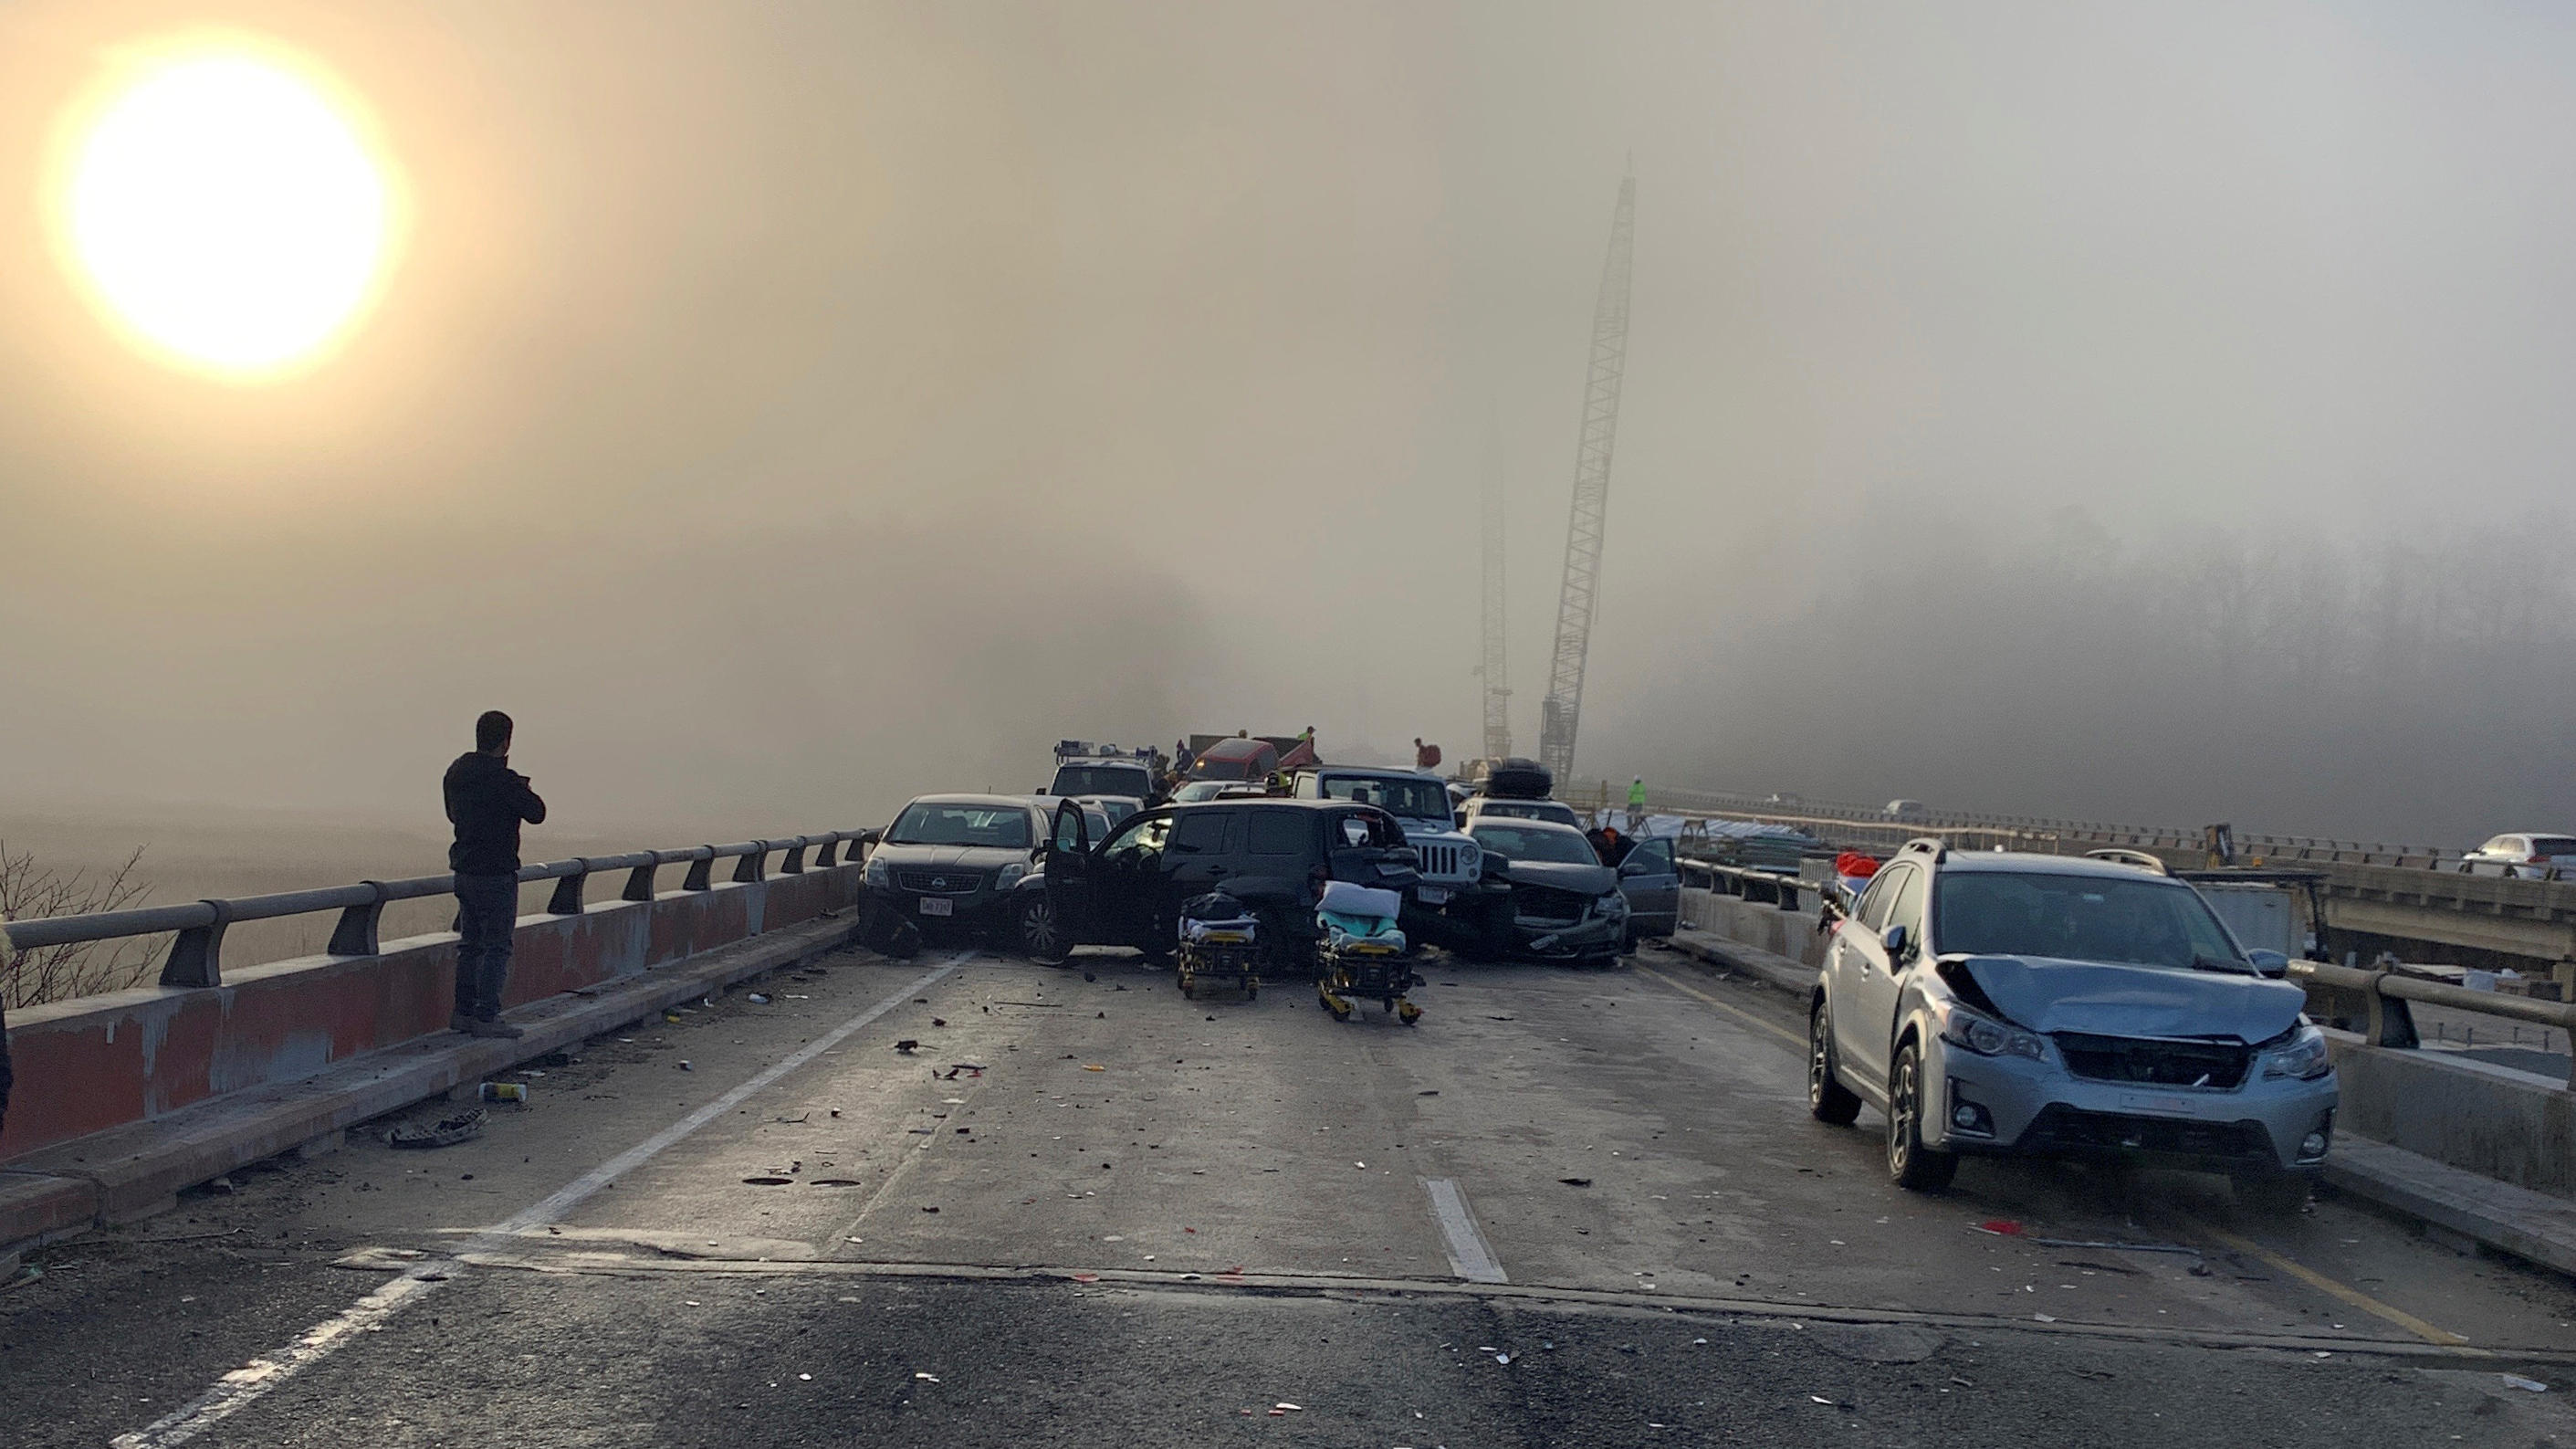 Damaged vehicles are seen after a chain reaction crash on I-64 in York County, Virginia, U.S. December 22, 2019, in this image obtained from social media. Bray Hollowell/via REUTERS THIS IMAGE HAS BEEN SUPPLIED BY A THIRD PARTY. MANDATORY CREDIT.